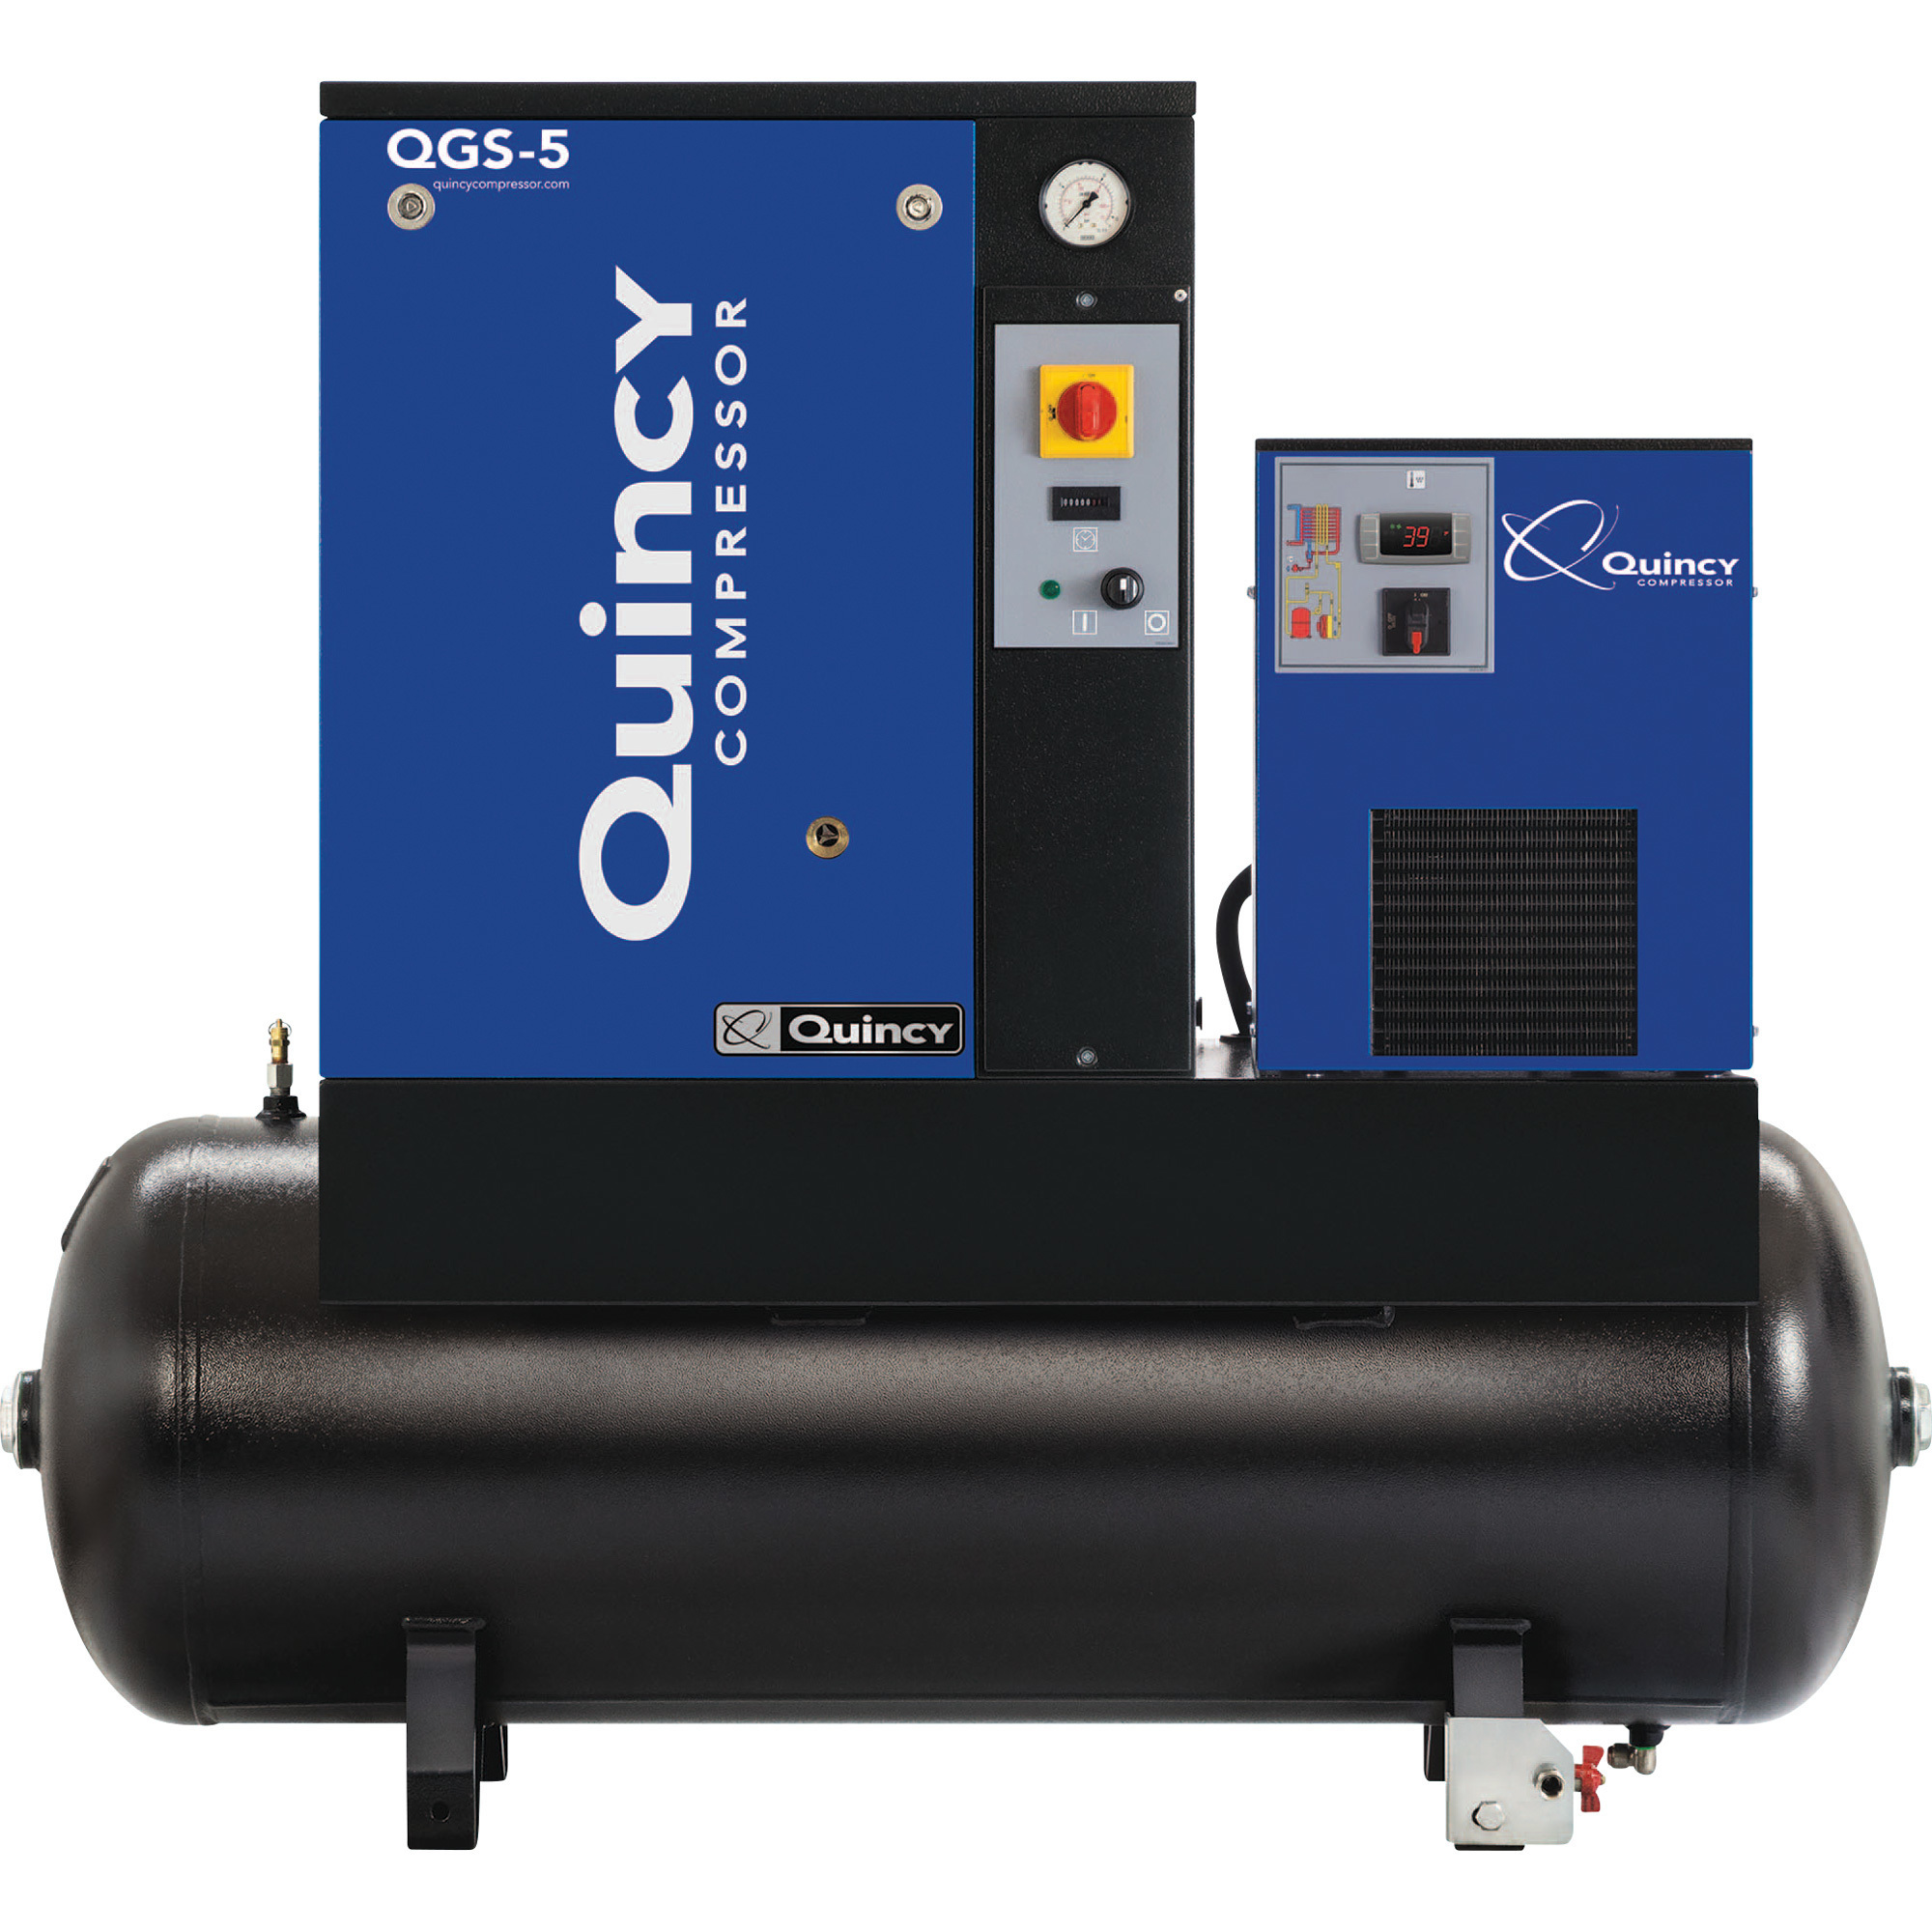 Quincy QGS-5 Rotary Screw Air Compressor w/ Dryer, 230 Volts, Single Phase, 5 HP, 16.6 CFM, 60 Gallon, Model 4152051926